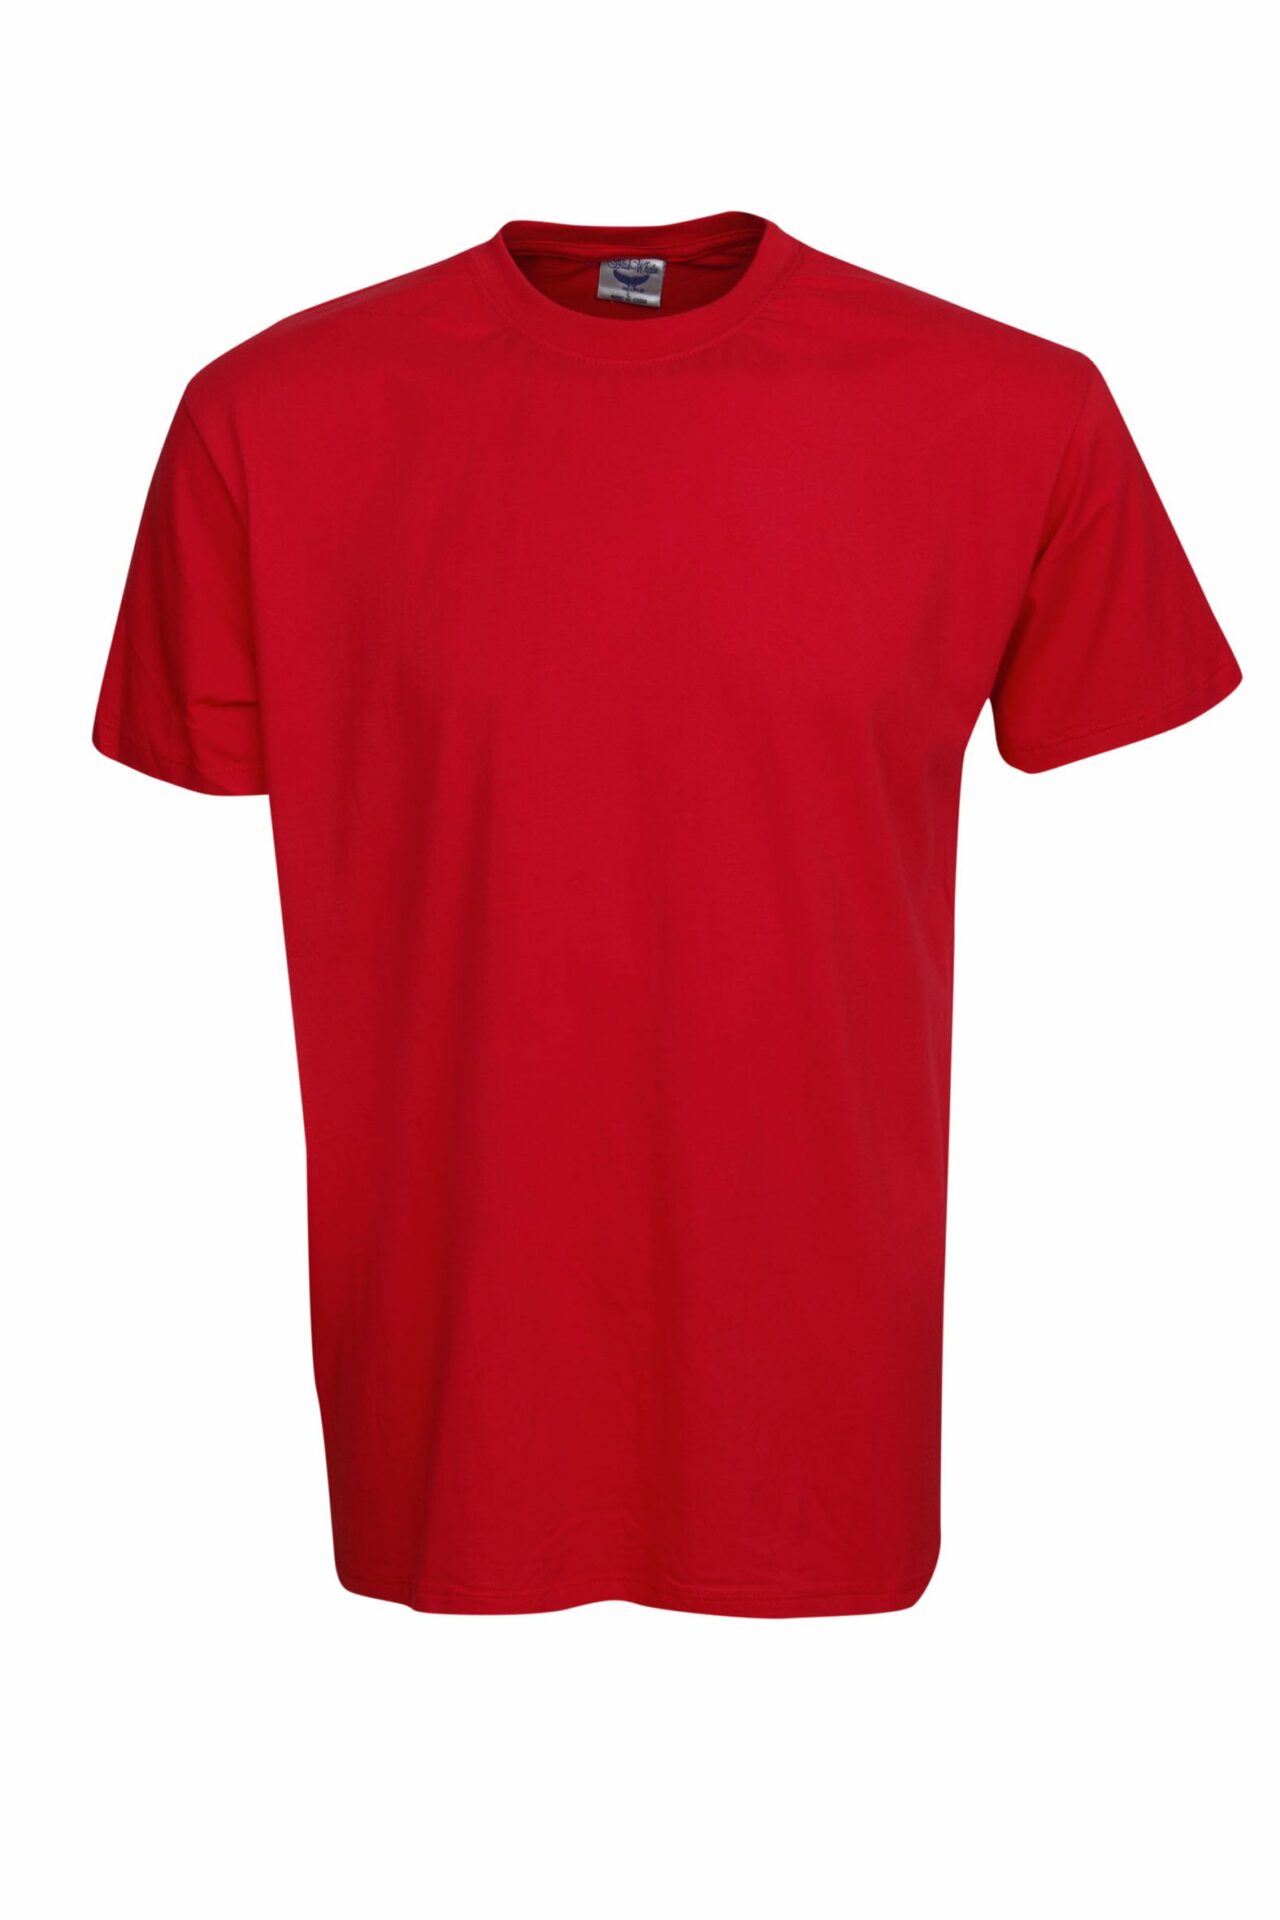 Buy T06-Eurostyle Soft - Feel Slim Fit T-shirt at Best Price - AJ Safety